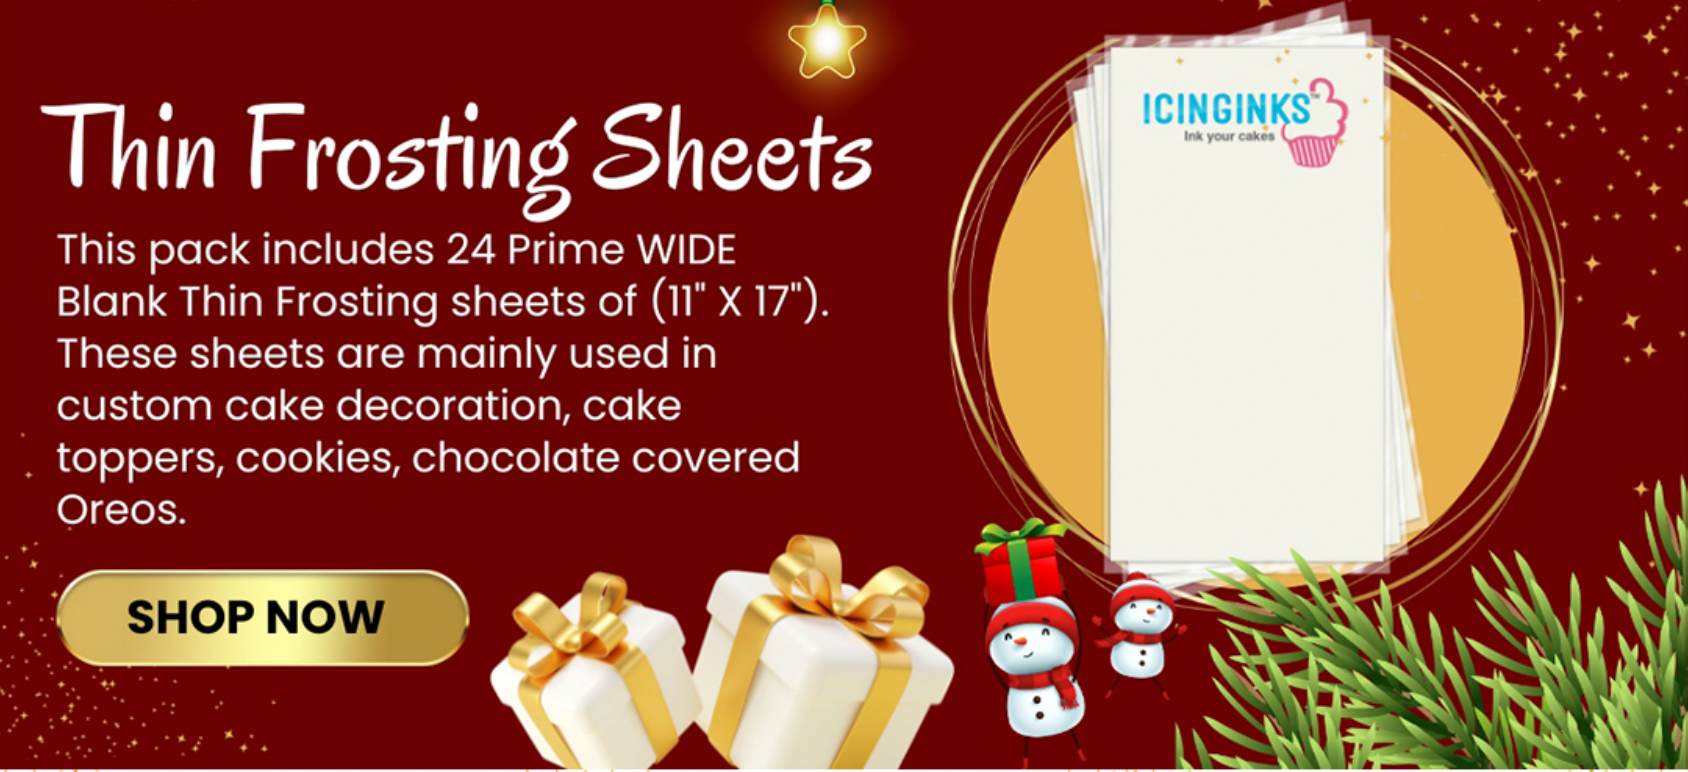 Icinginks Thin Edible Frosting Sheets